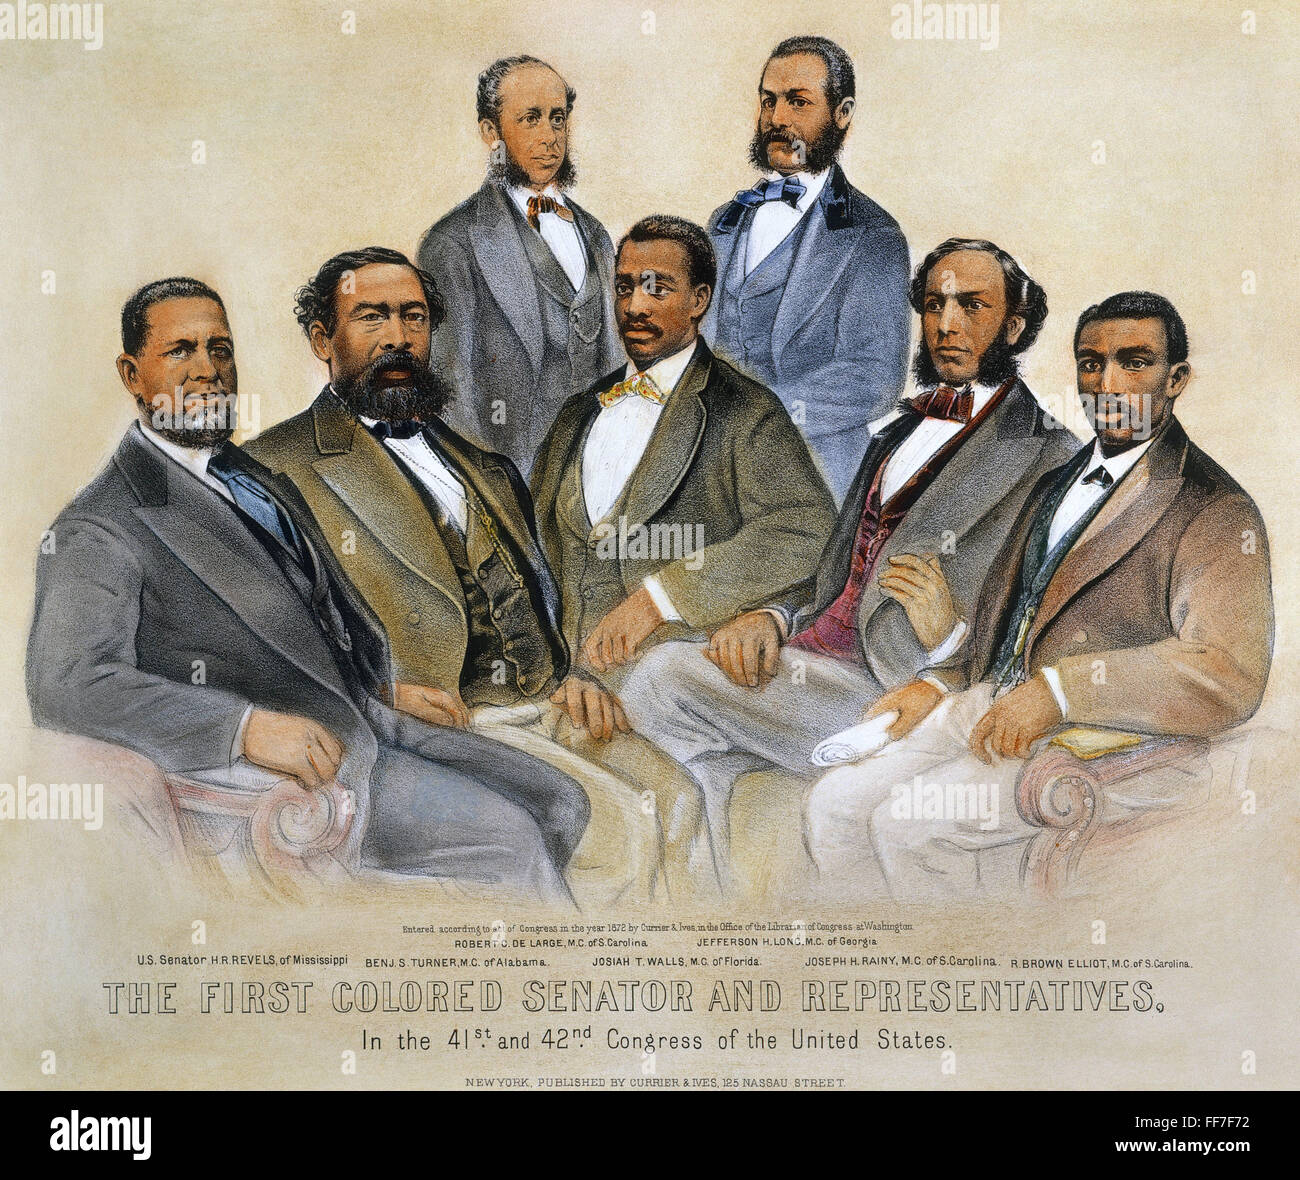 BLACK SENATORS, 1872. /n'The First Colored Senators and Representatives in the 41st and 42nd Congress of the United States.' Lithograph, 1872, by Currier & Ives. Stock Photo